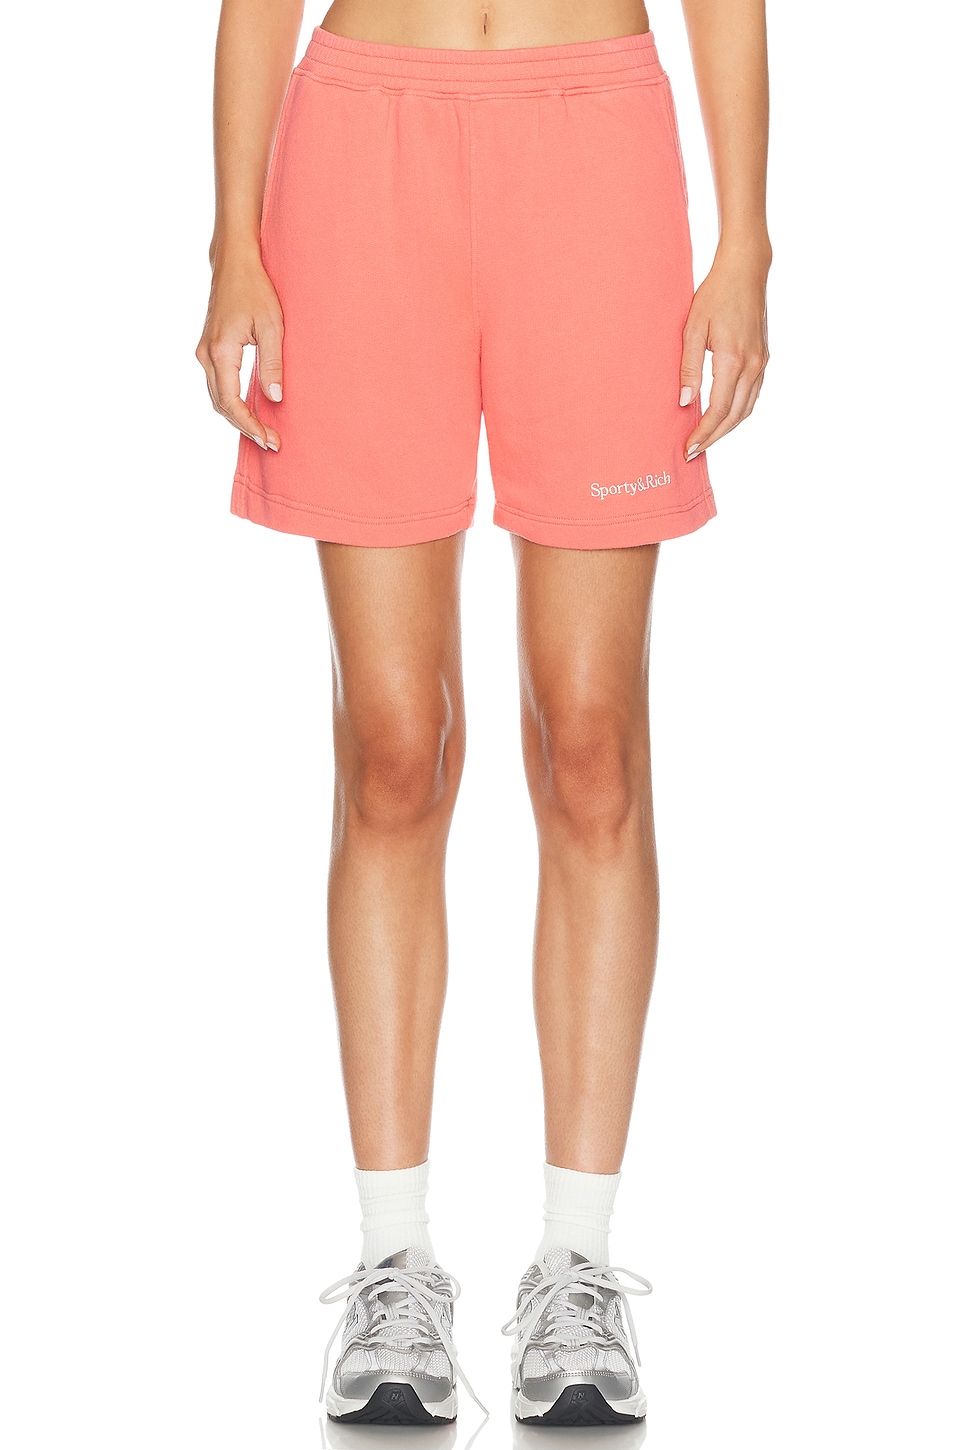 Image 1 of Sporty & Rich Serif Logo Soft Gym Short in Cotton Candy & White